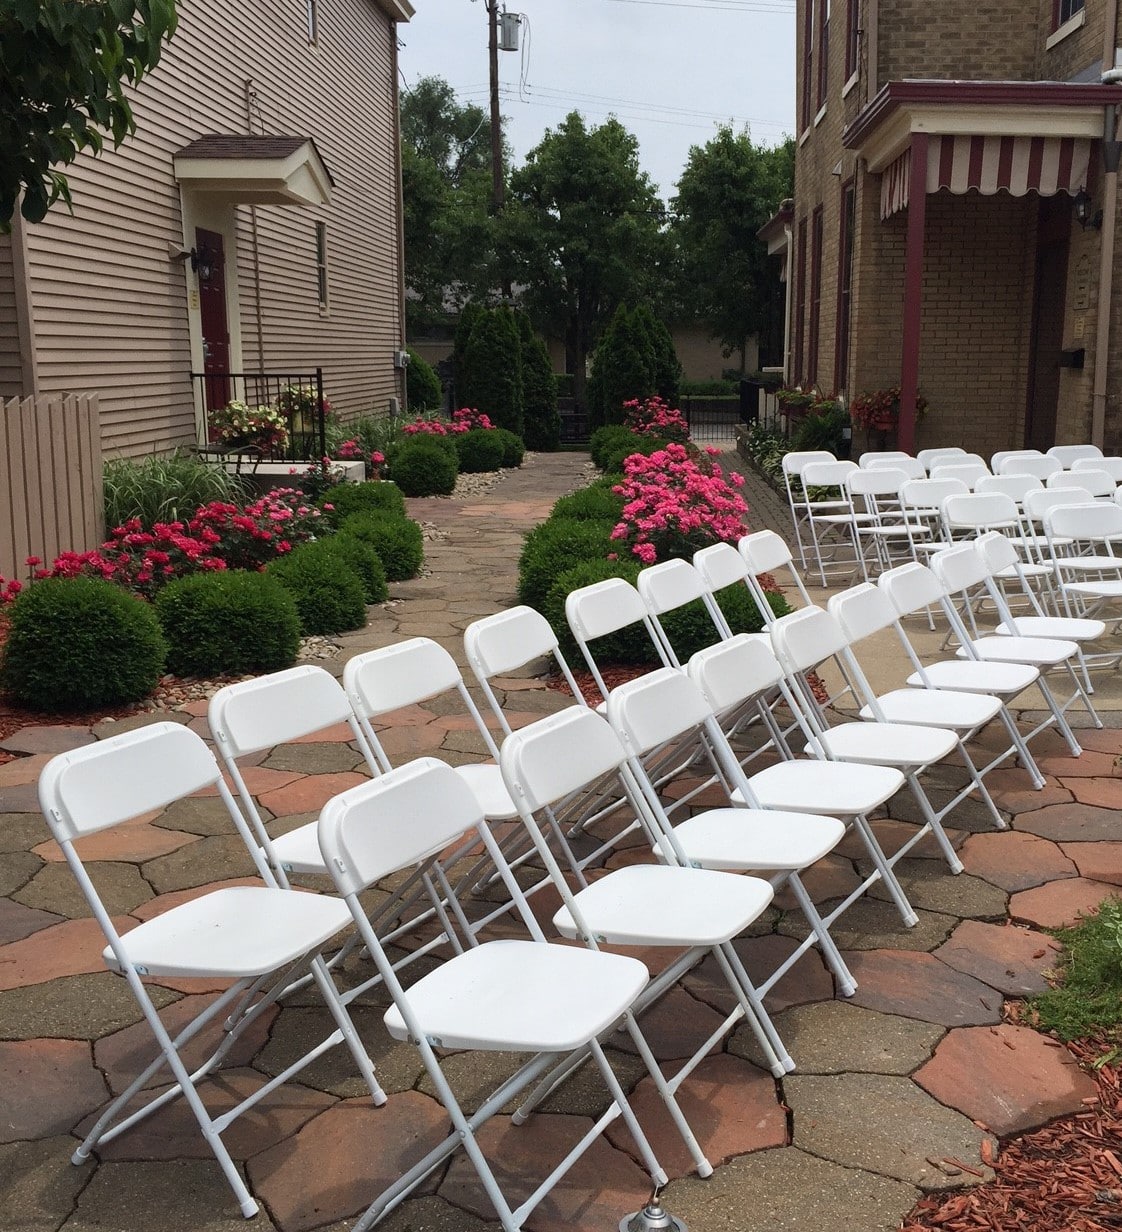 Patio with 25 white chairs, green small bushes and pink roses